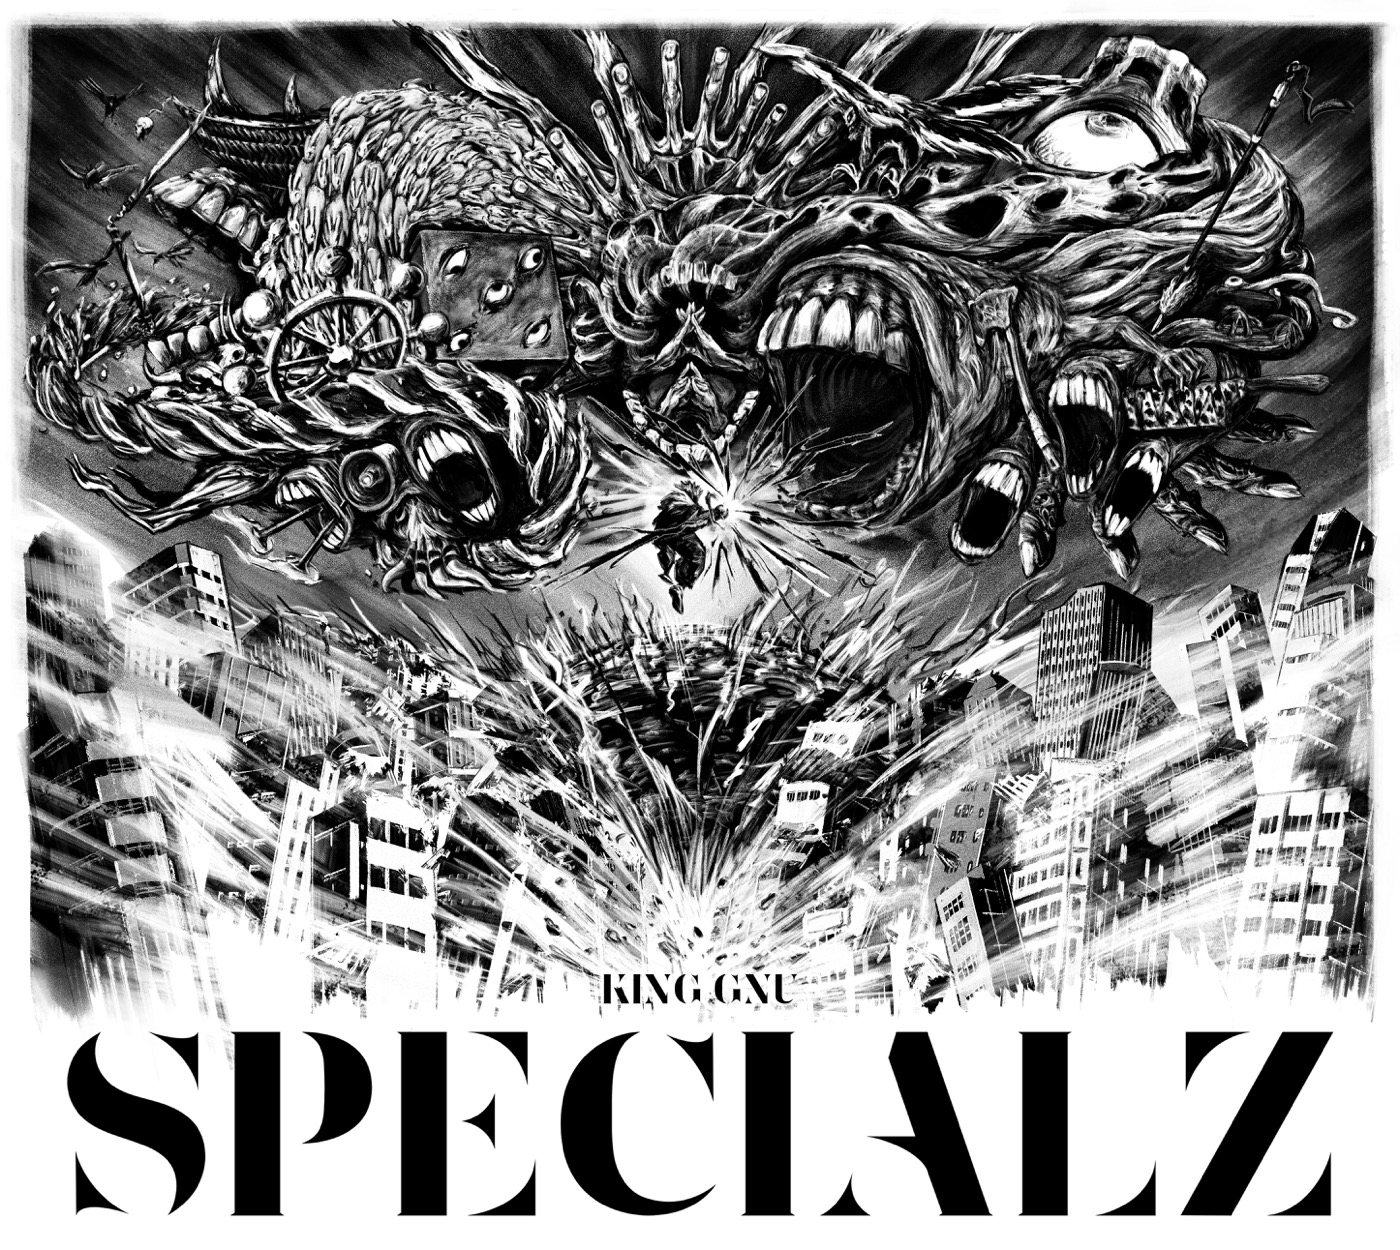 King Gnu新曲「SPECIALZ」が、TVアニメ『呪術廻戦』「渋谷事変」OPテーマに決定 - 画像一覧（2/3）